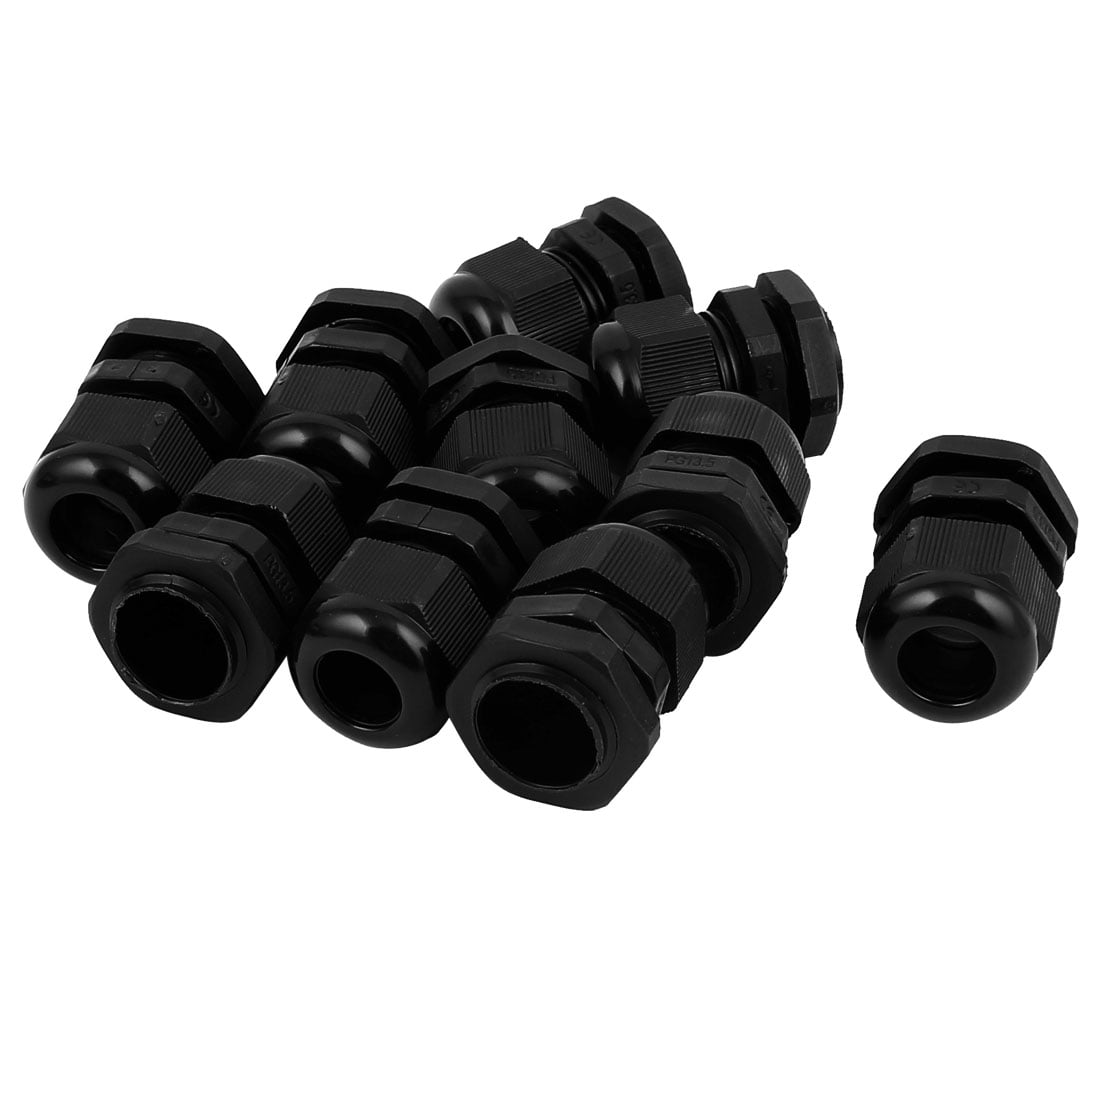 Waterproof Cord Grip 12-15mm Dia Cable Gland Connector PG19 10Pcs 